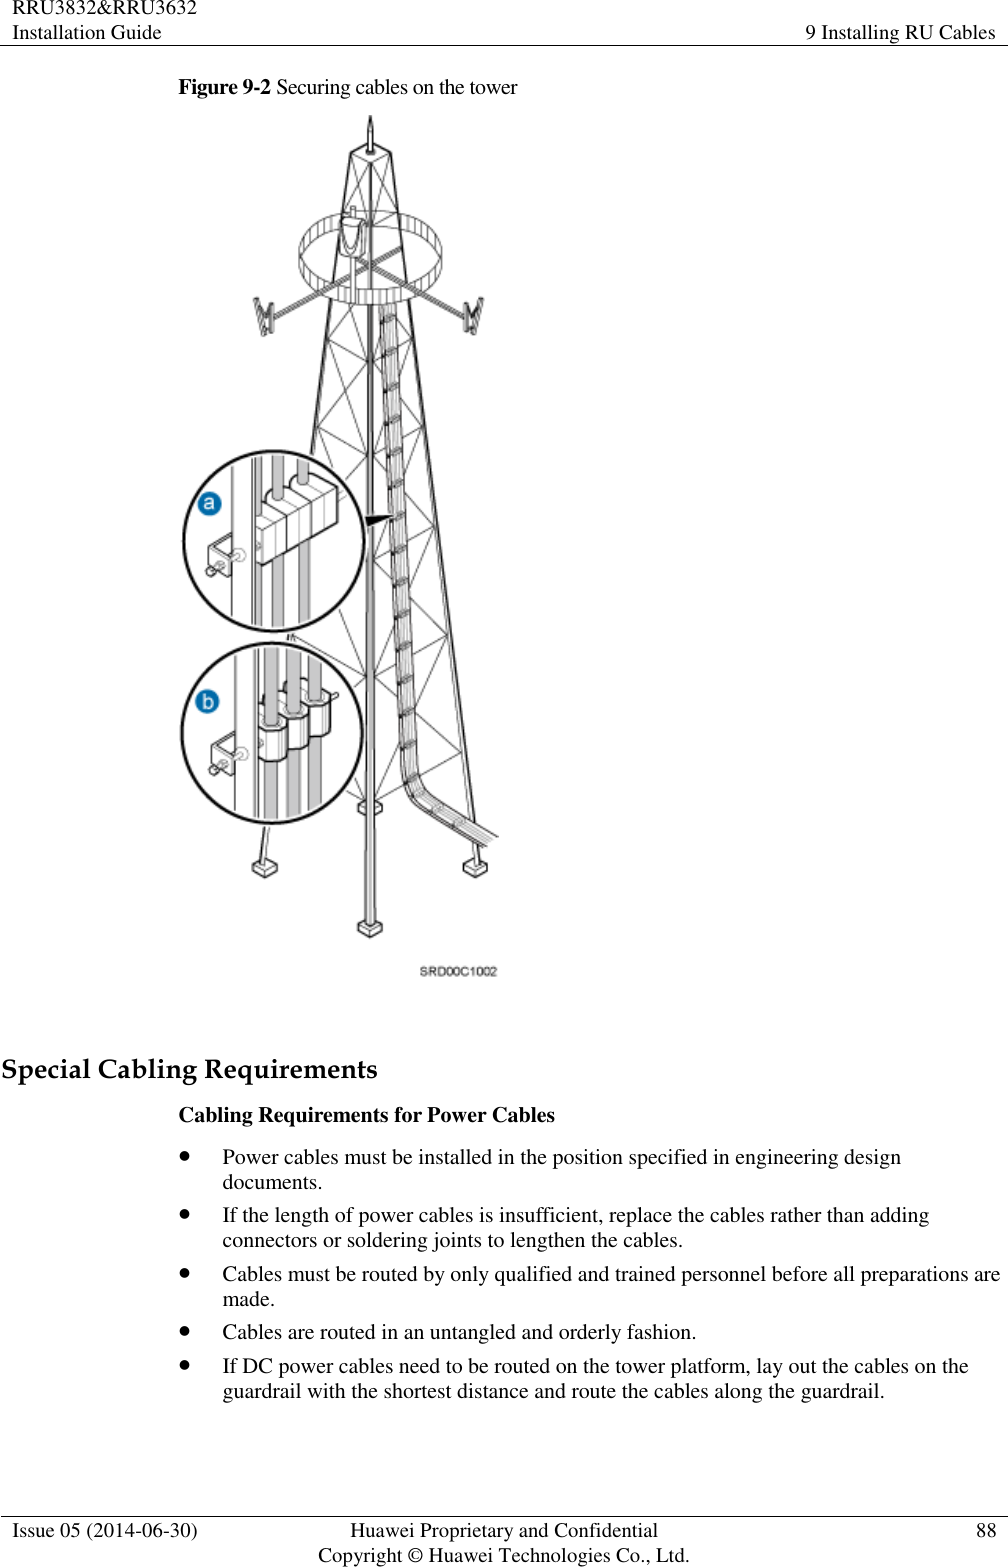 RRU3832&amp;RRU3632 Installation Guide 9 Installing RU Cables  Issue 05 (2014-06-30) Huawei Proprietary and Confidential                                     Copyright © Huawei Technologies Co., Ltd. 88  Figure 9-2 Securing cables on the tower   Special Cabling Requirements Cabling Requirements for Power Cables  Power cables must be installed in the position specified in engineering design documents.  If the length of power cables is insufficient, replace the cables rather than adding connectors or soldering joints to lengthen the cables.  Cables must be routed by only qualified and trained personnel before all preparations are made.  Cables are routed in an untangled and orderly fashion.  If DC power cables need to be routed on the tower platform, lay out the cables on the guardrail with the shortest distance and route the cables along the guardrail. 